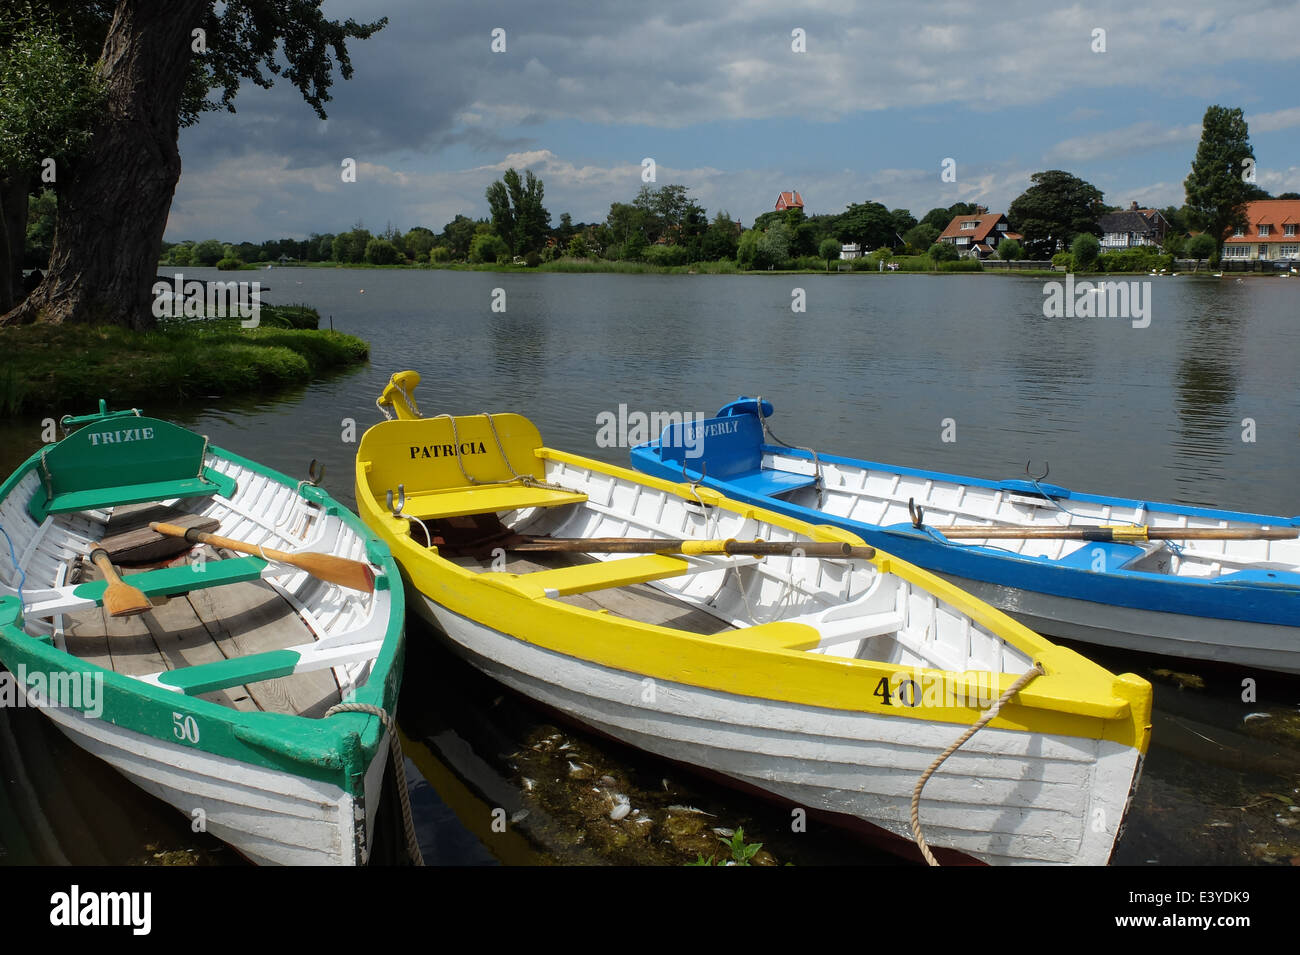 See mit Booten bei Thorpeness in Sussex East Anglia, England Stockfoto